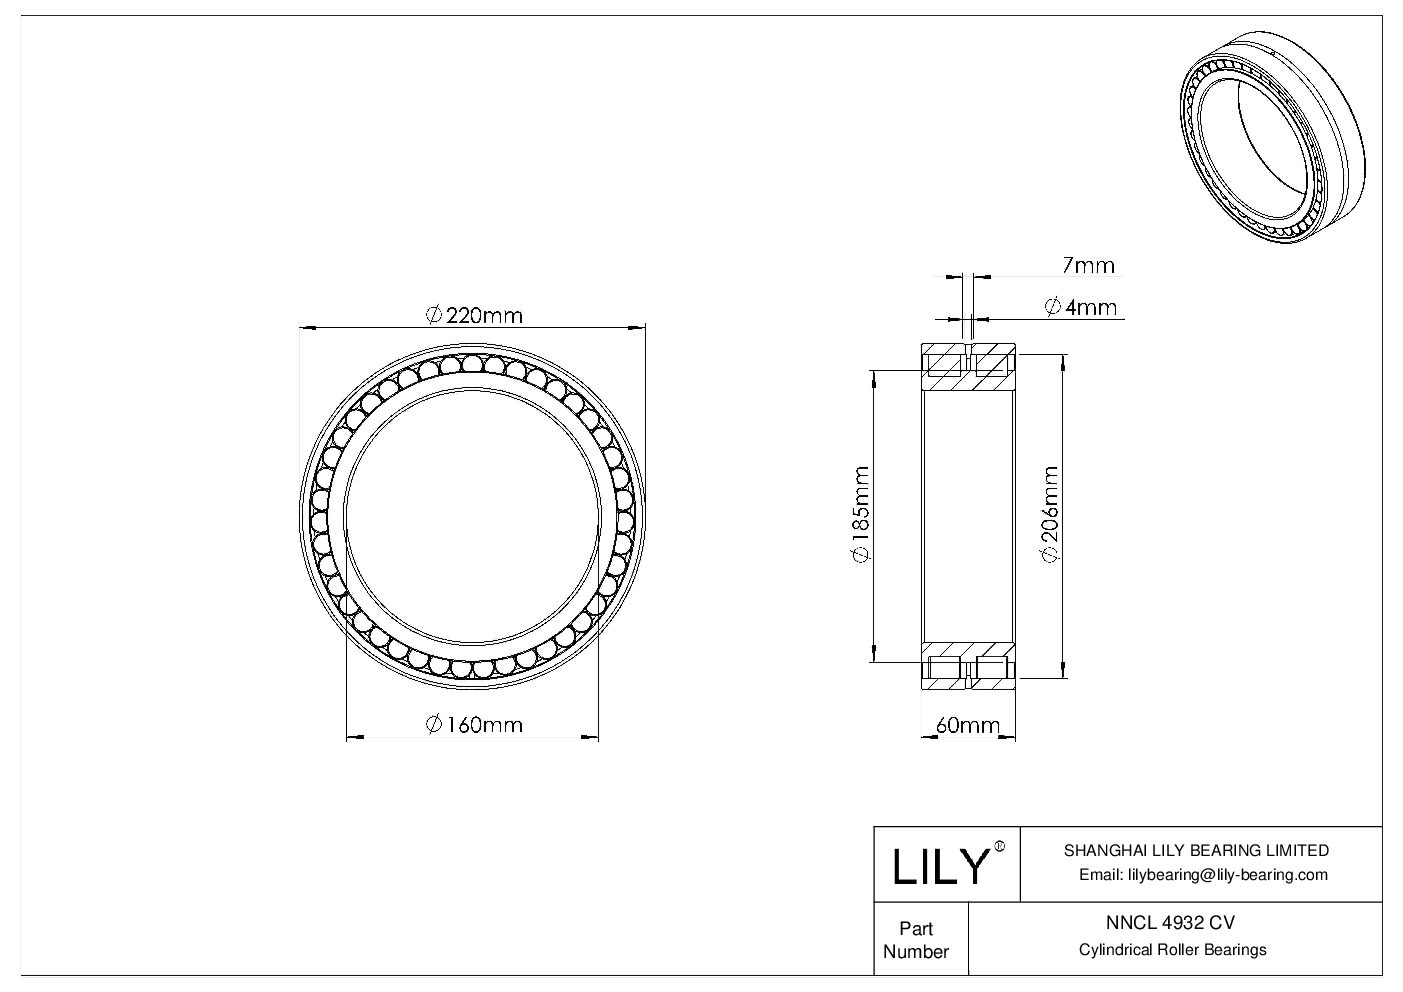 NNCL 4932 CV Double Row Full Complement Cylindrical Roller Bearings cad drawing